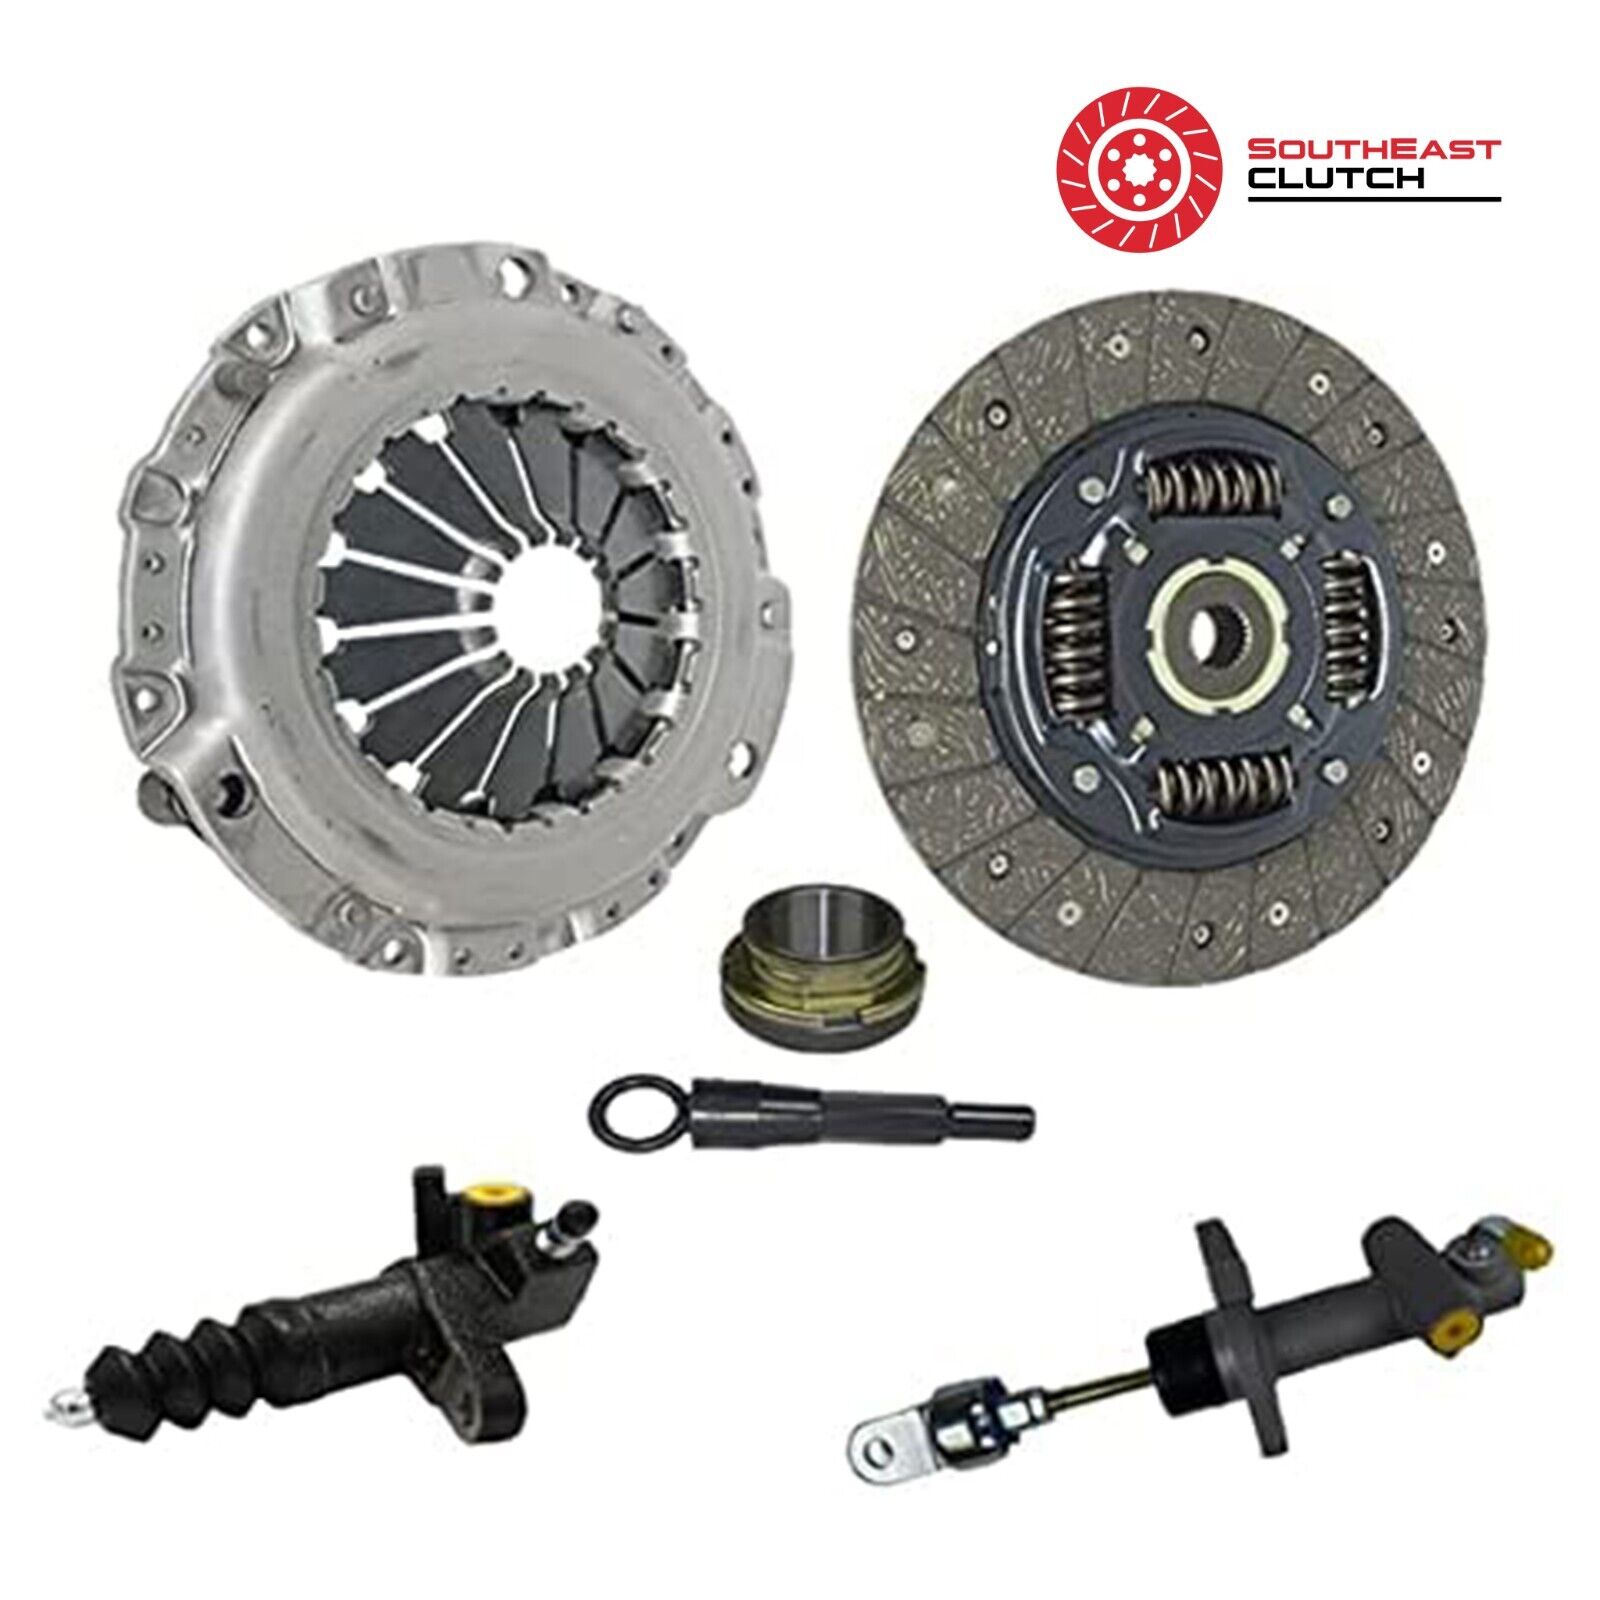 SECLUTCH Clutch with Master and Slave for 00-16 Aveo Lanos G3 Wave 5 Swift+ 1.6L